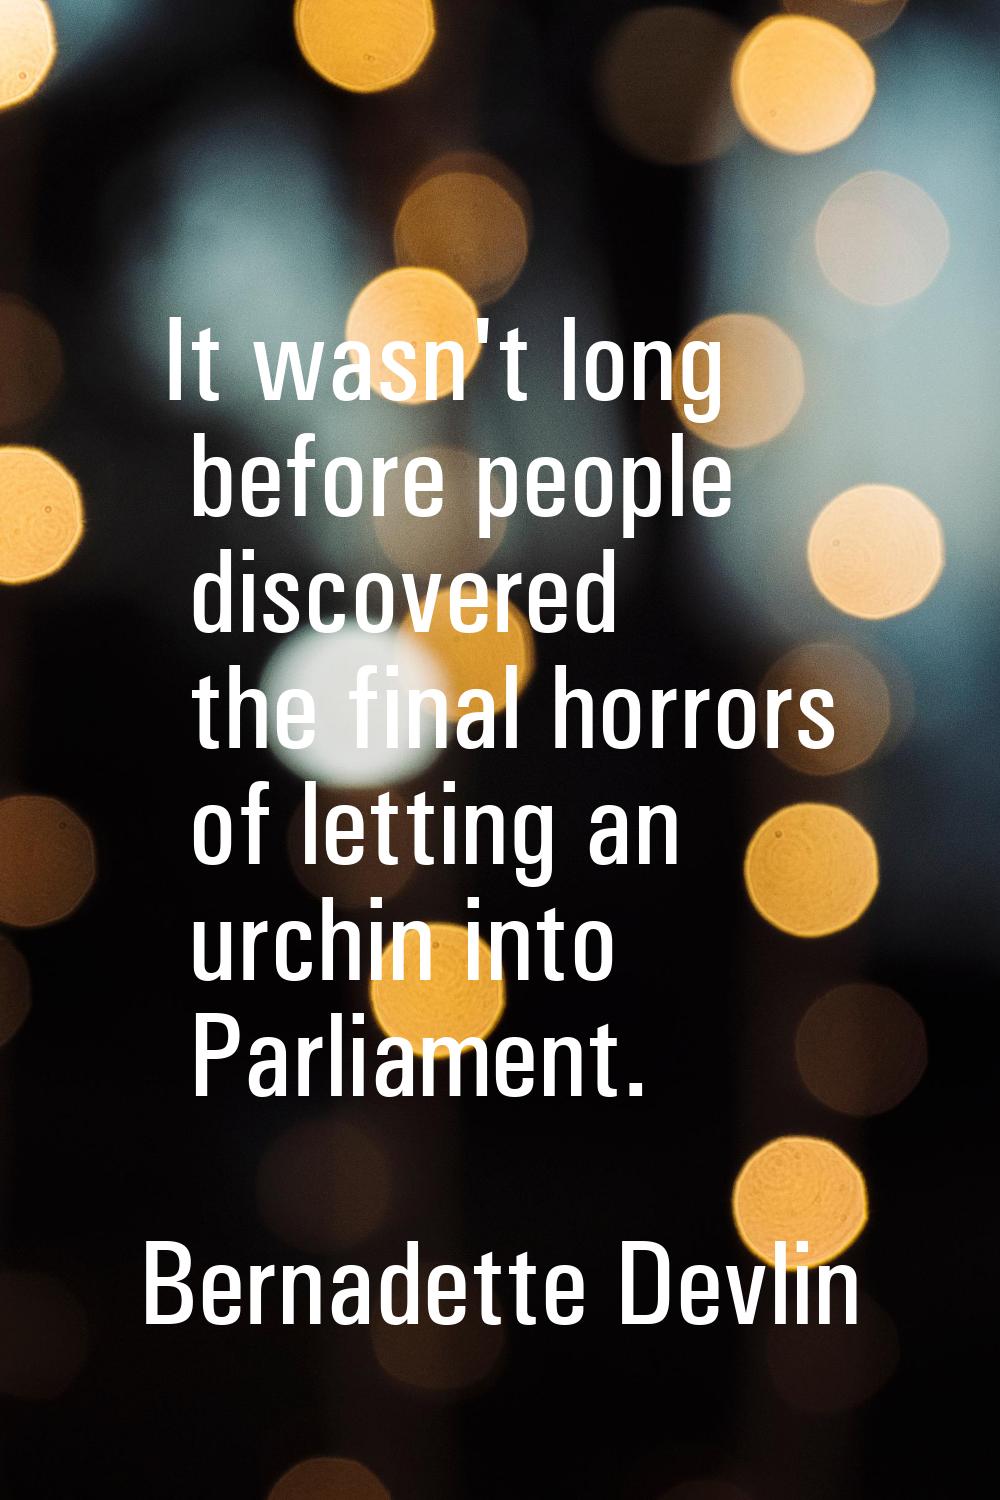 It wasn't long before people discovered the final horrors of letting an urchin into Parliament.